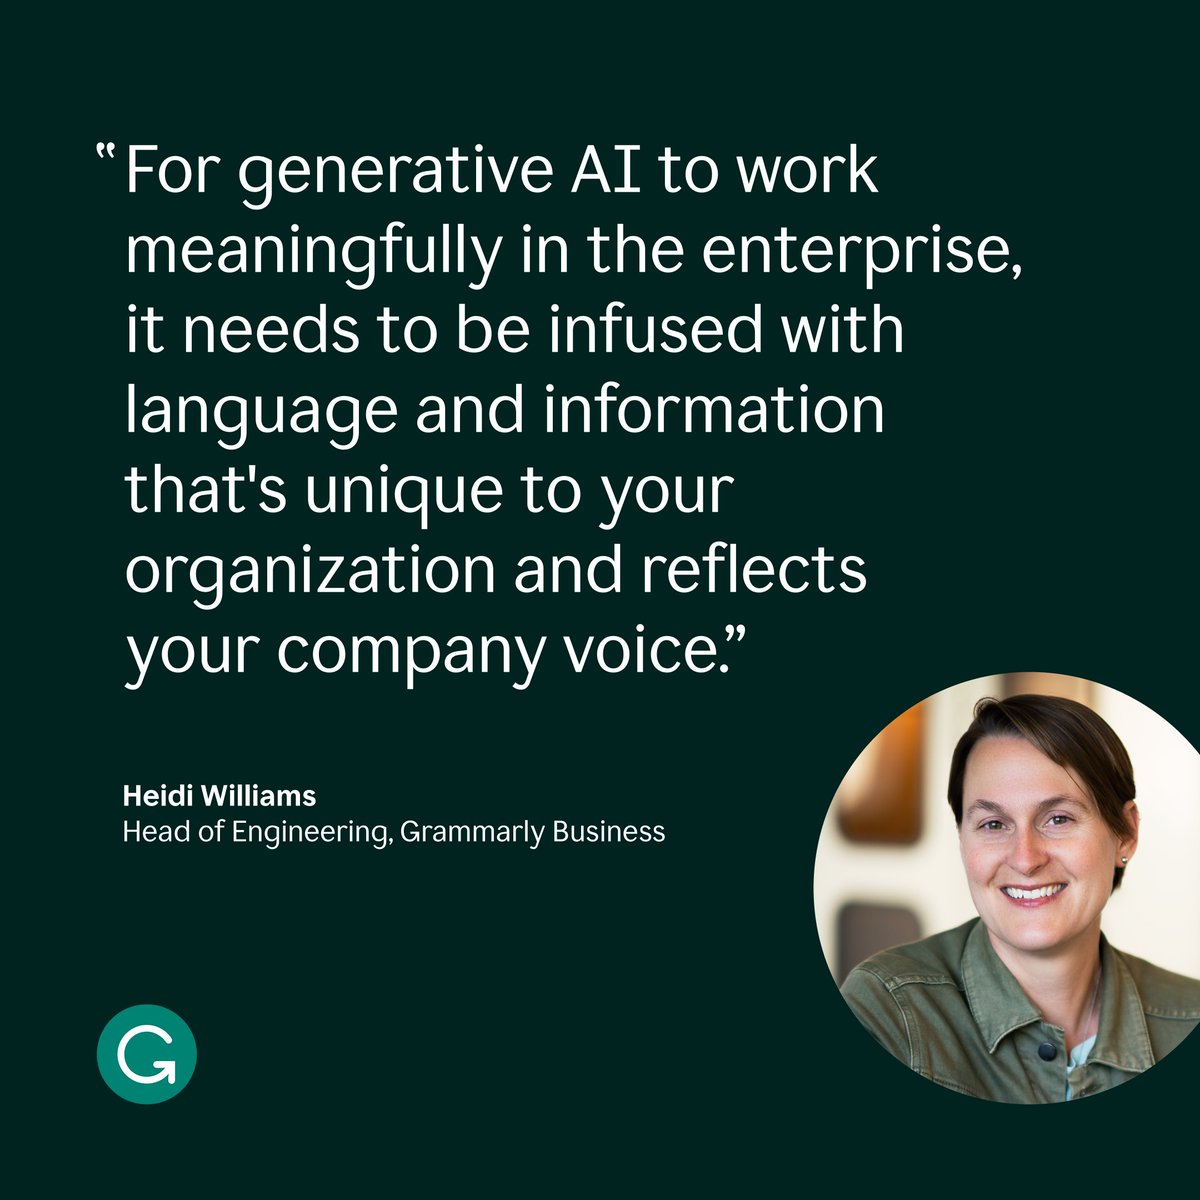 The @Grammarly Keynote spotlighted many new features. 

One highlight for me was when Heidi Williams announced Knowledge Share for Grammarly Business. 

It will be a game-changer for our team to have organizational context at our fingertips. 

#GrammarlyKeynote